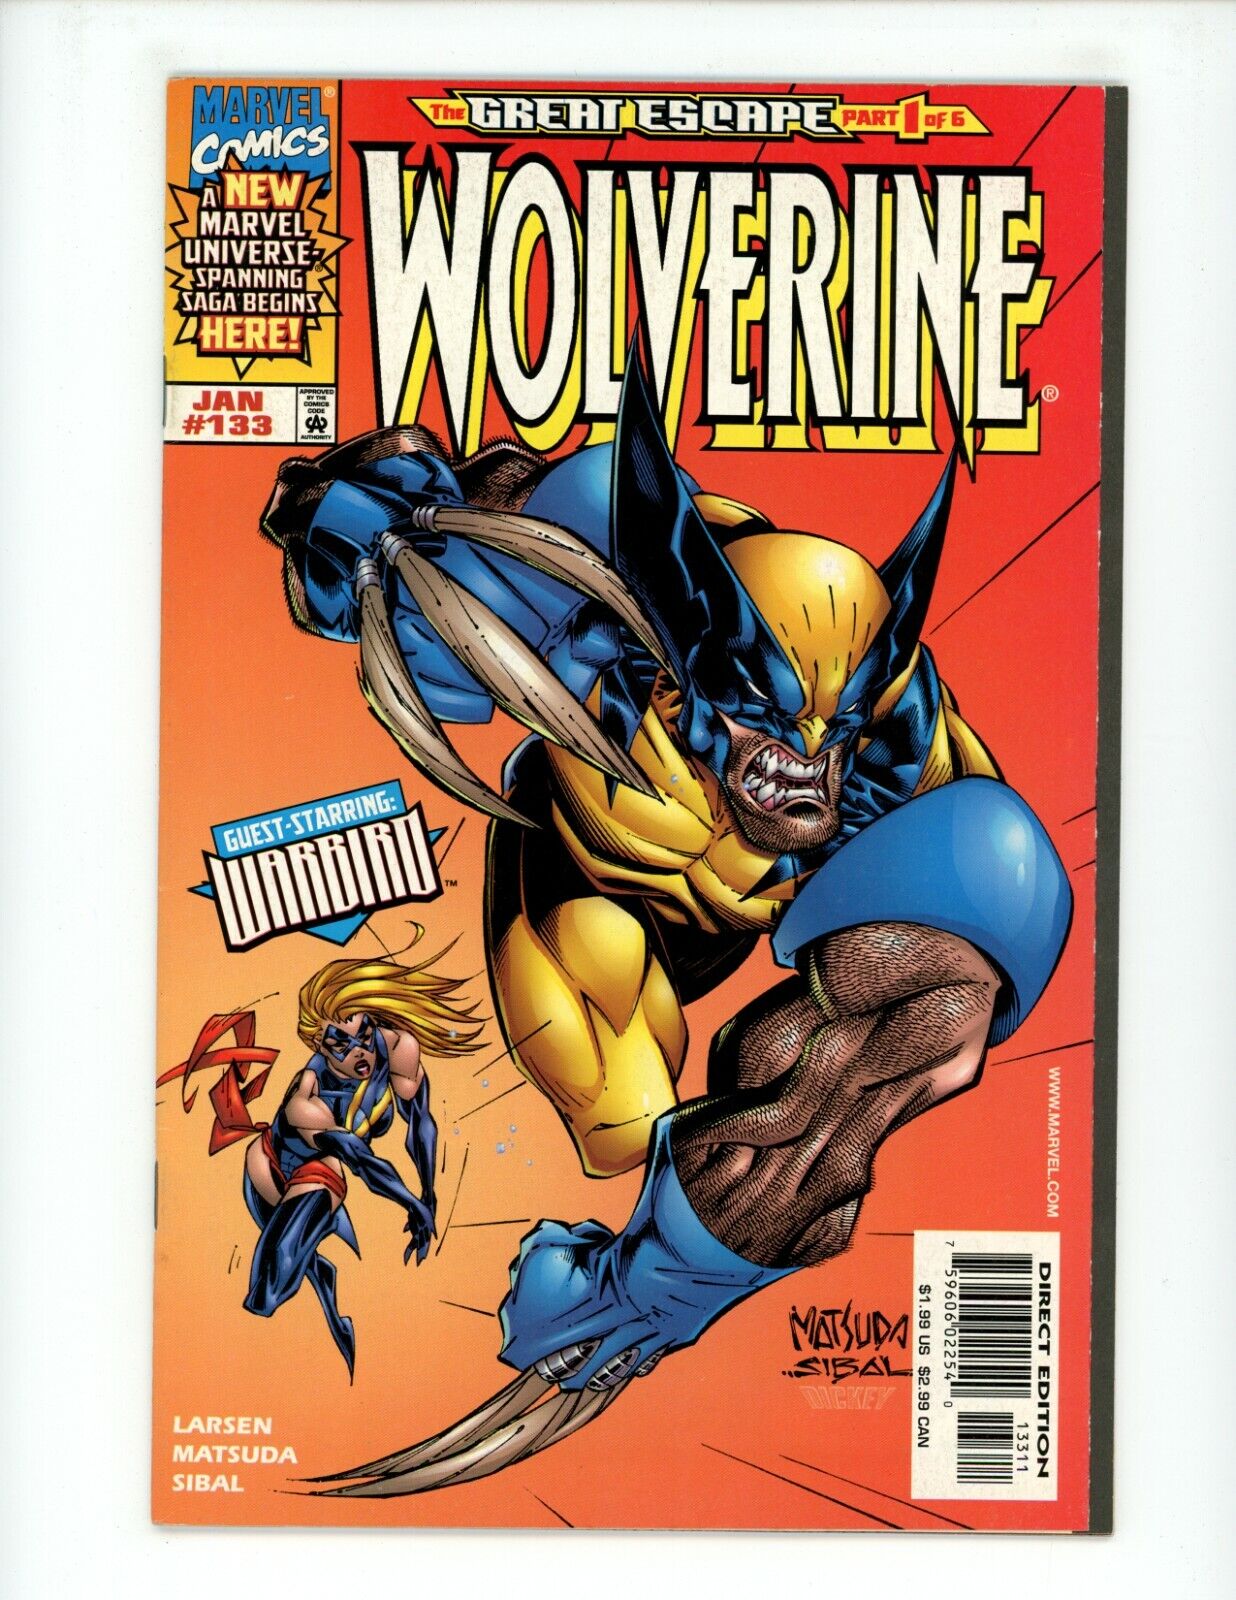 Wolverine #133 1999 VF+ Cover A by Erik Larsen and Jeff Matsuda Comic Book